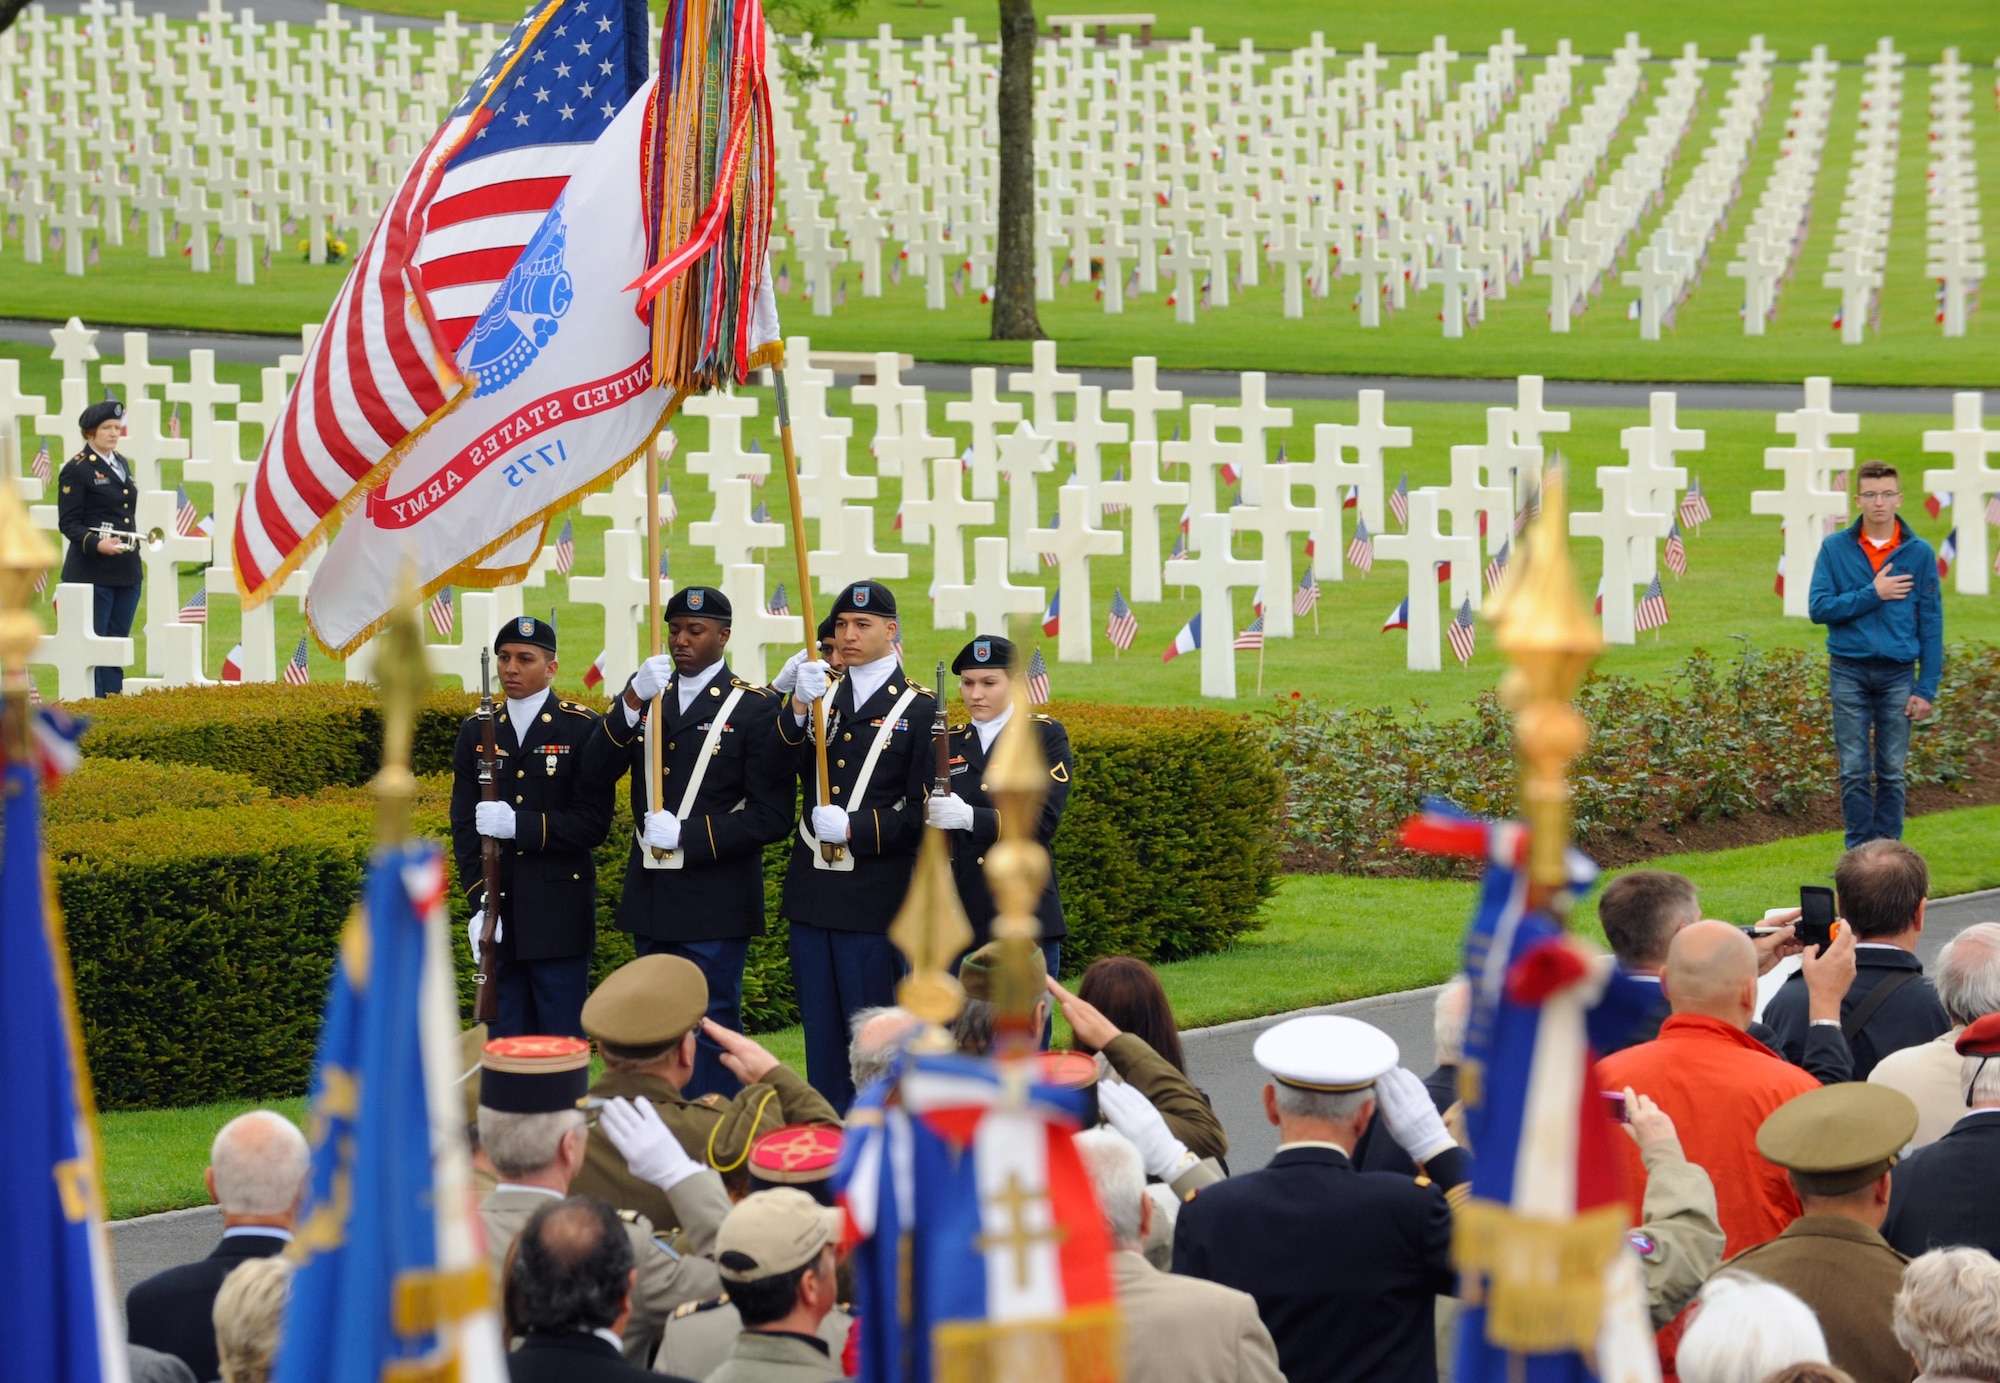 Members of the 16th Sustainment Brigade present the colors during a Memorial Day ceremony May 29, 2016, at Lorraine American Cemetery and Memorial, in St. Avold, France. Memorial Day recognizes men and women who have died while serving in the Armed Forces. (U.S. Air Force photo/Staff Sgt. Sharida Jackson)